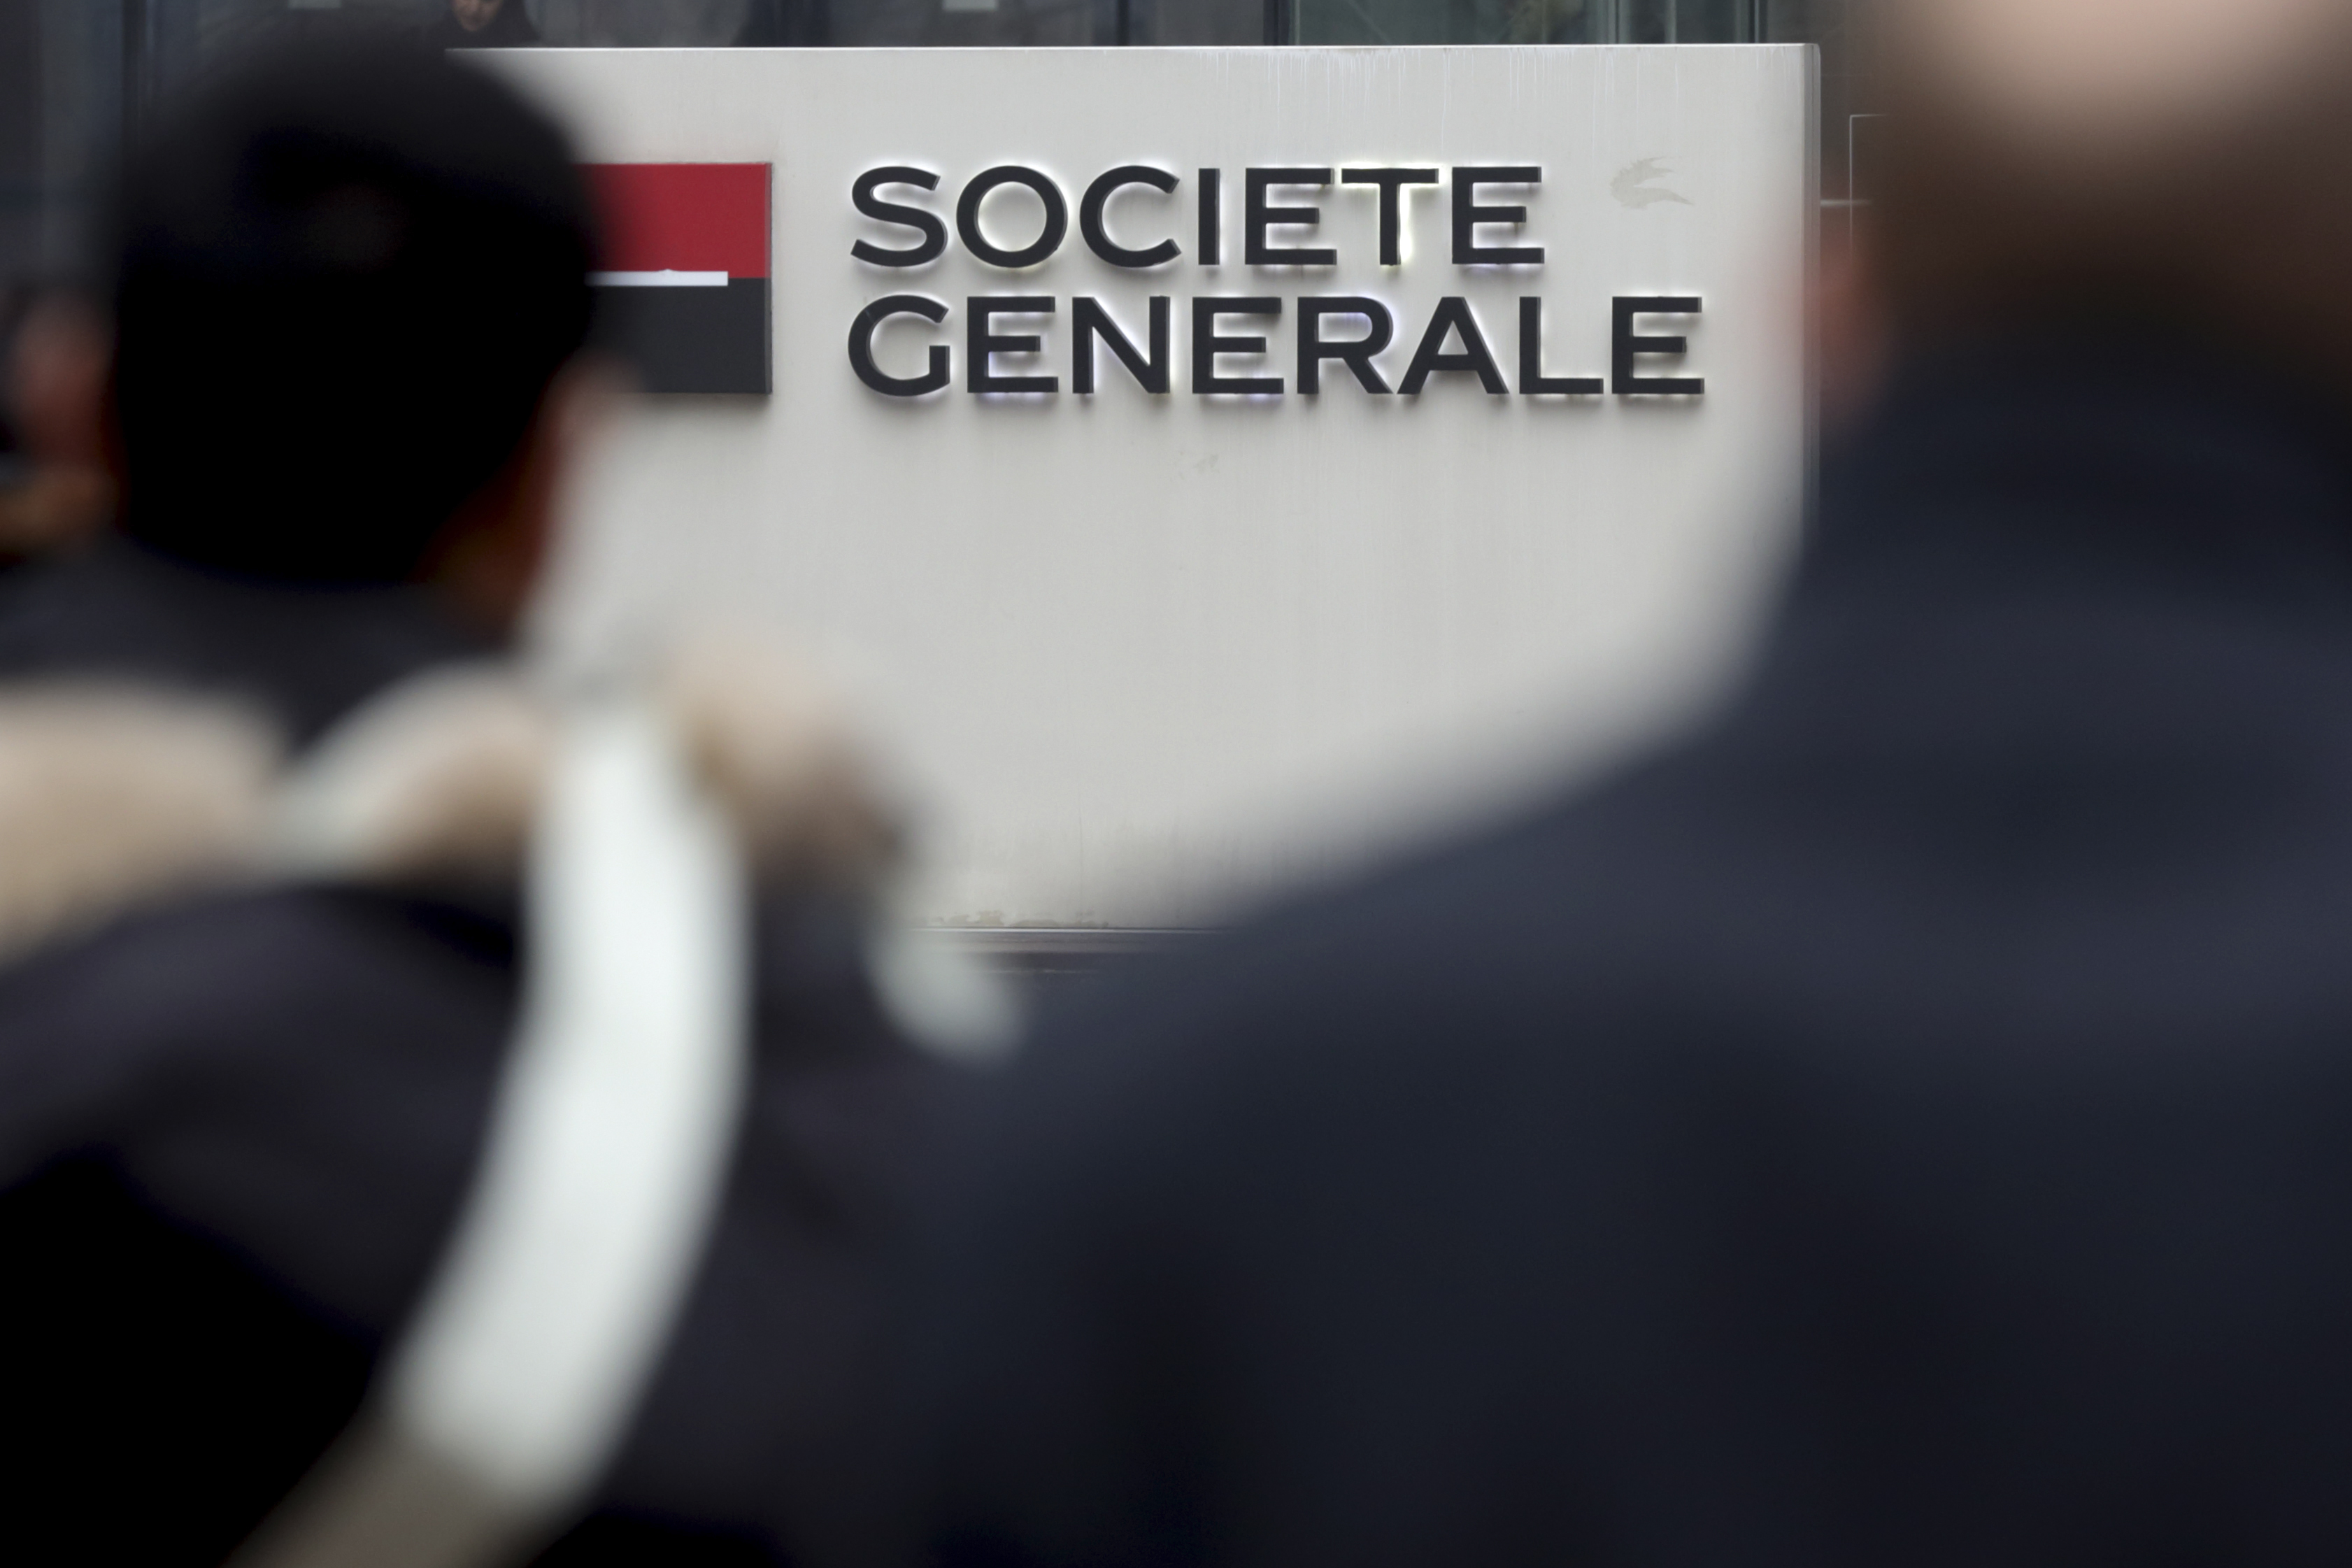 The logo of French bank Societe Generale is pictured at the entrance of the bank's headquarters in La Defense near Paris